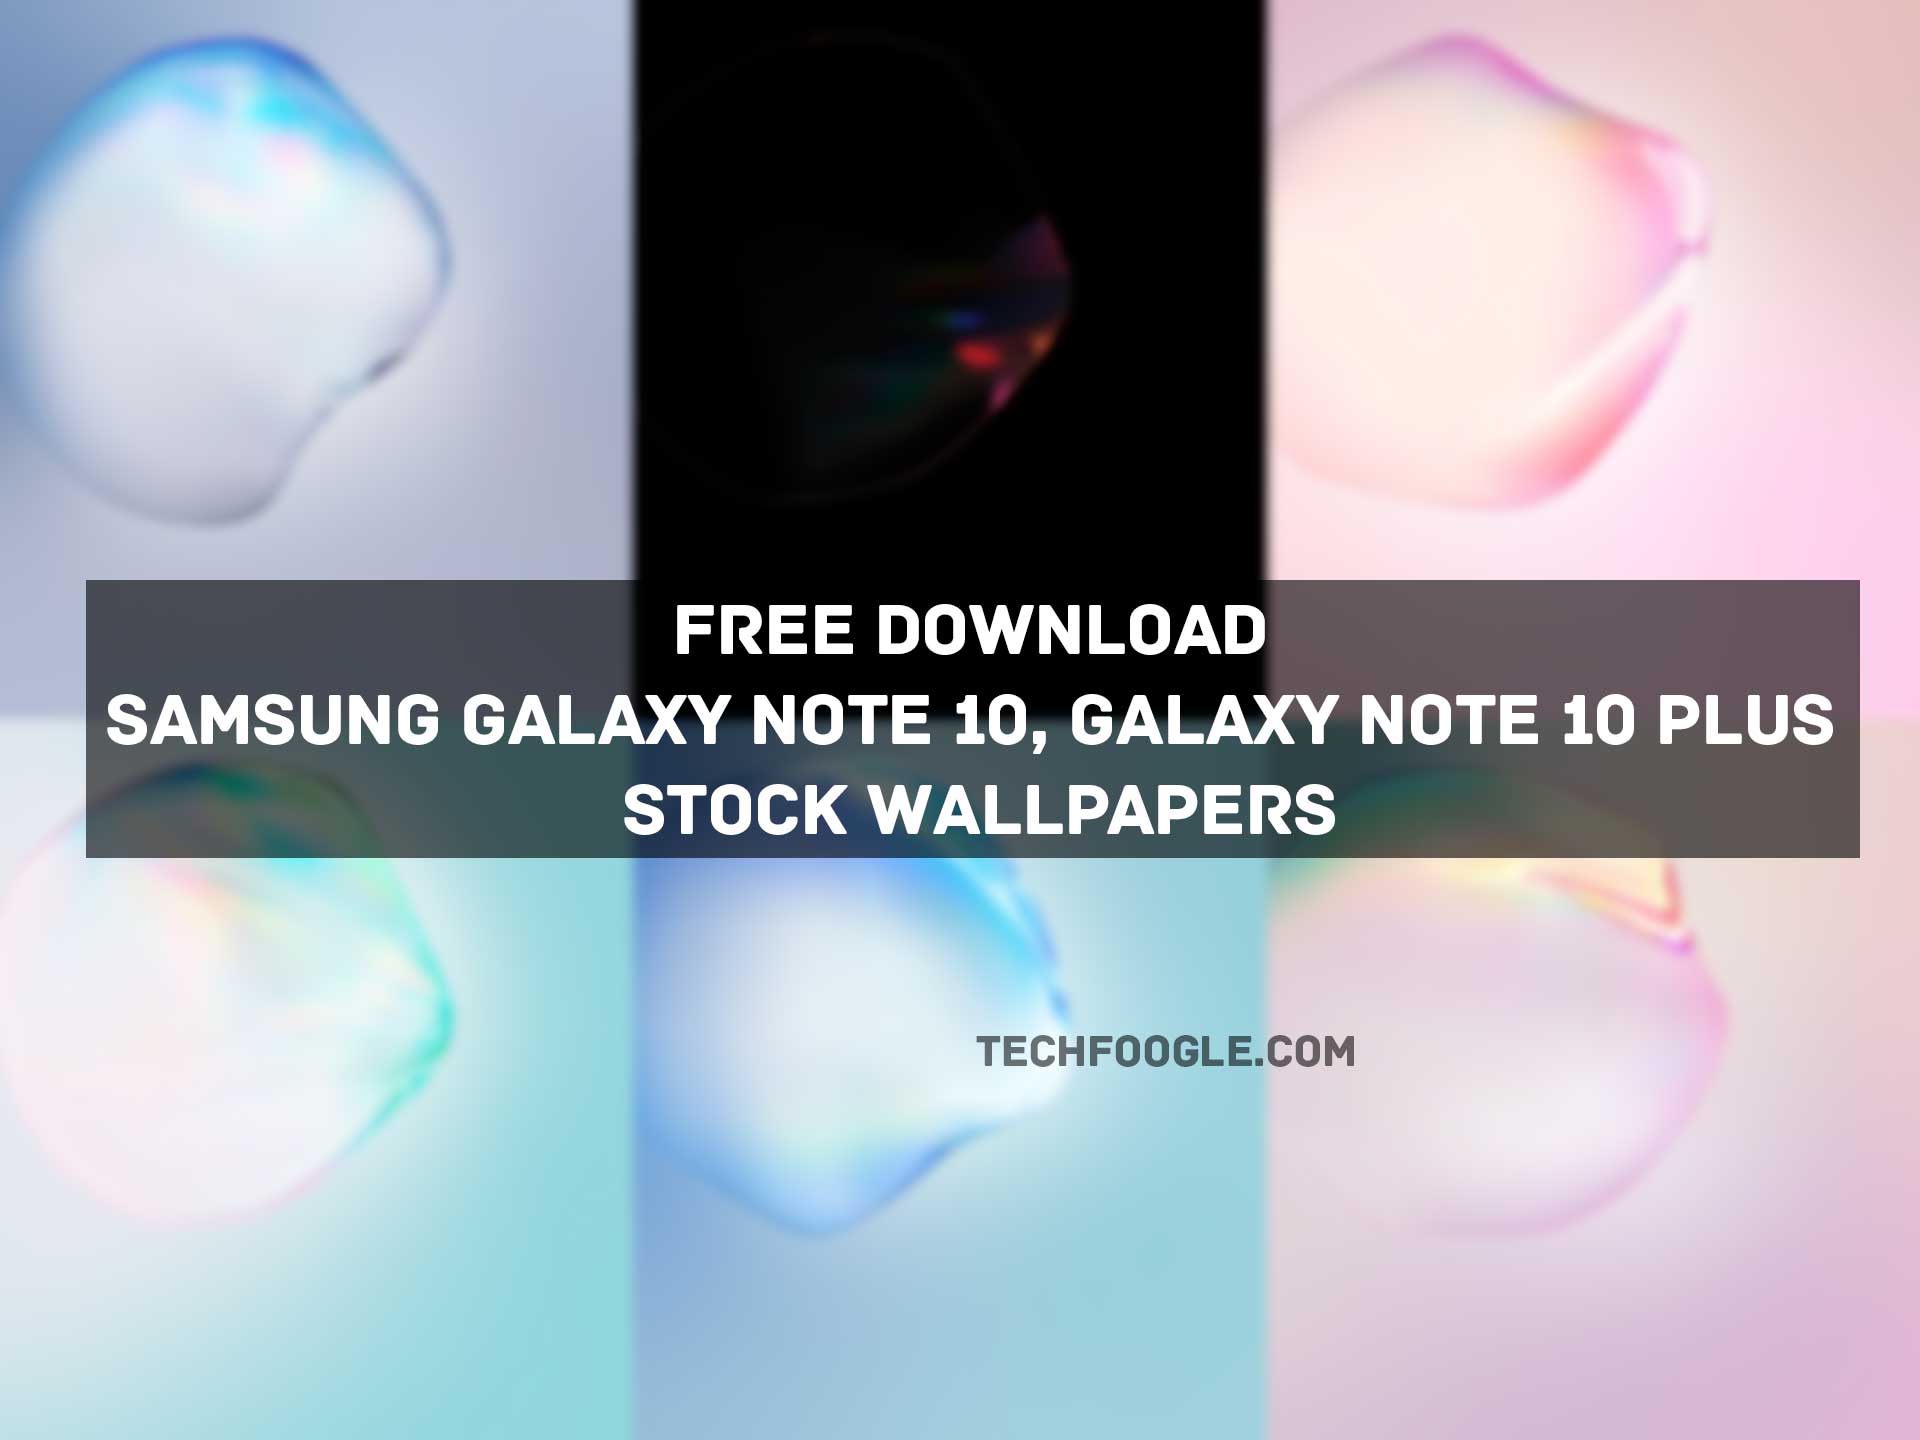 Free Download Samsung Galaxy Note 10, Galaxy Note 10 Plus Stock Wallpapers  - TechFoogle